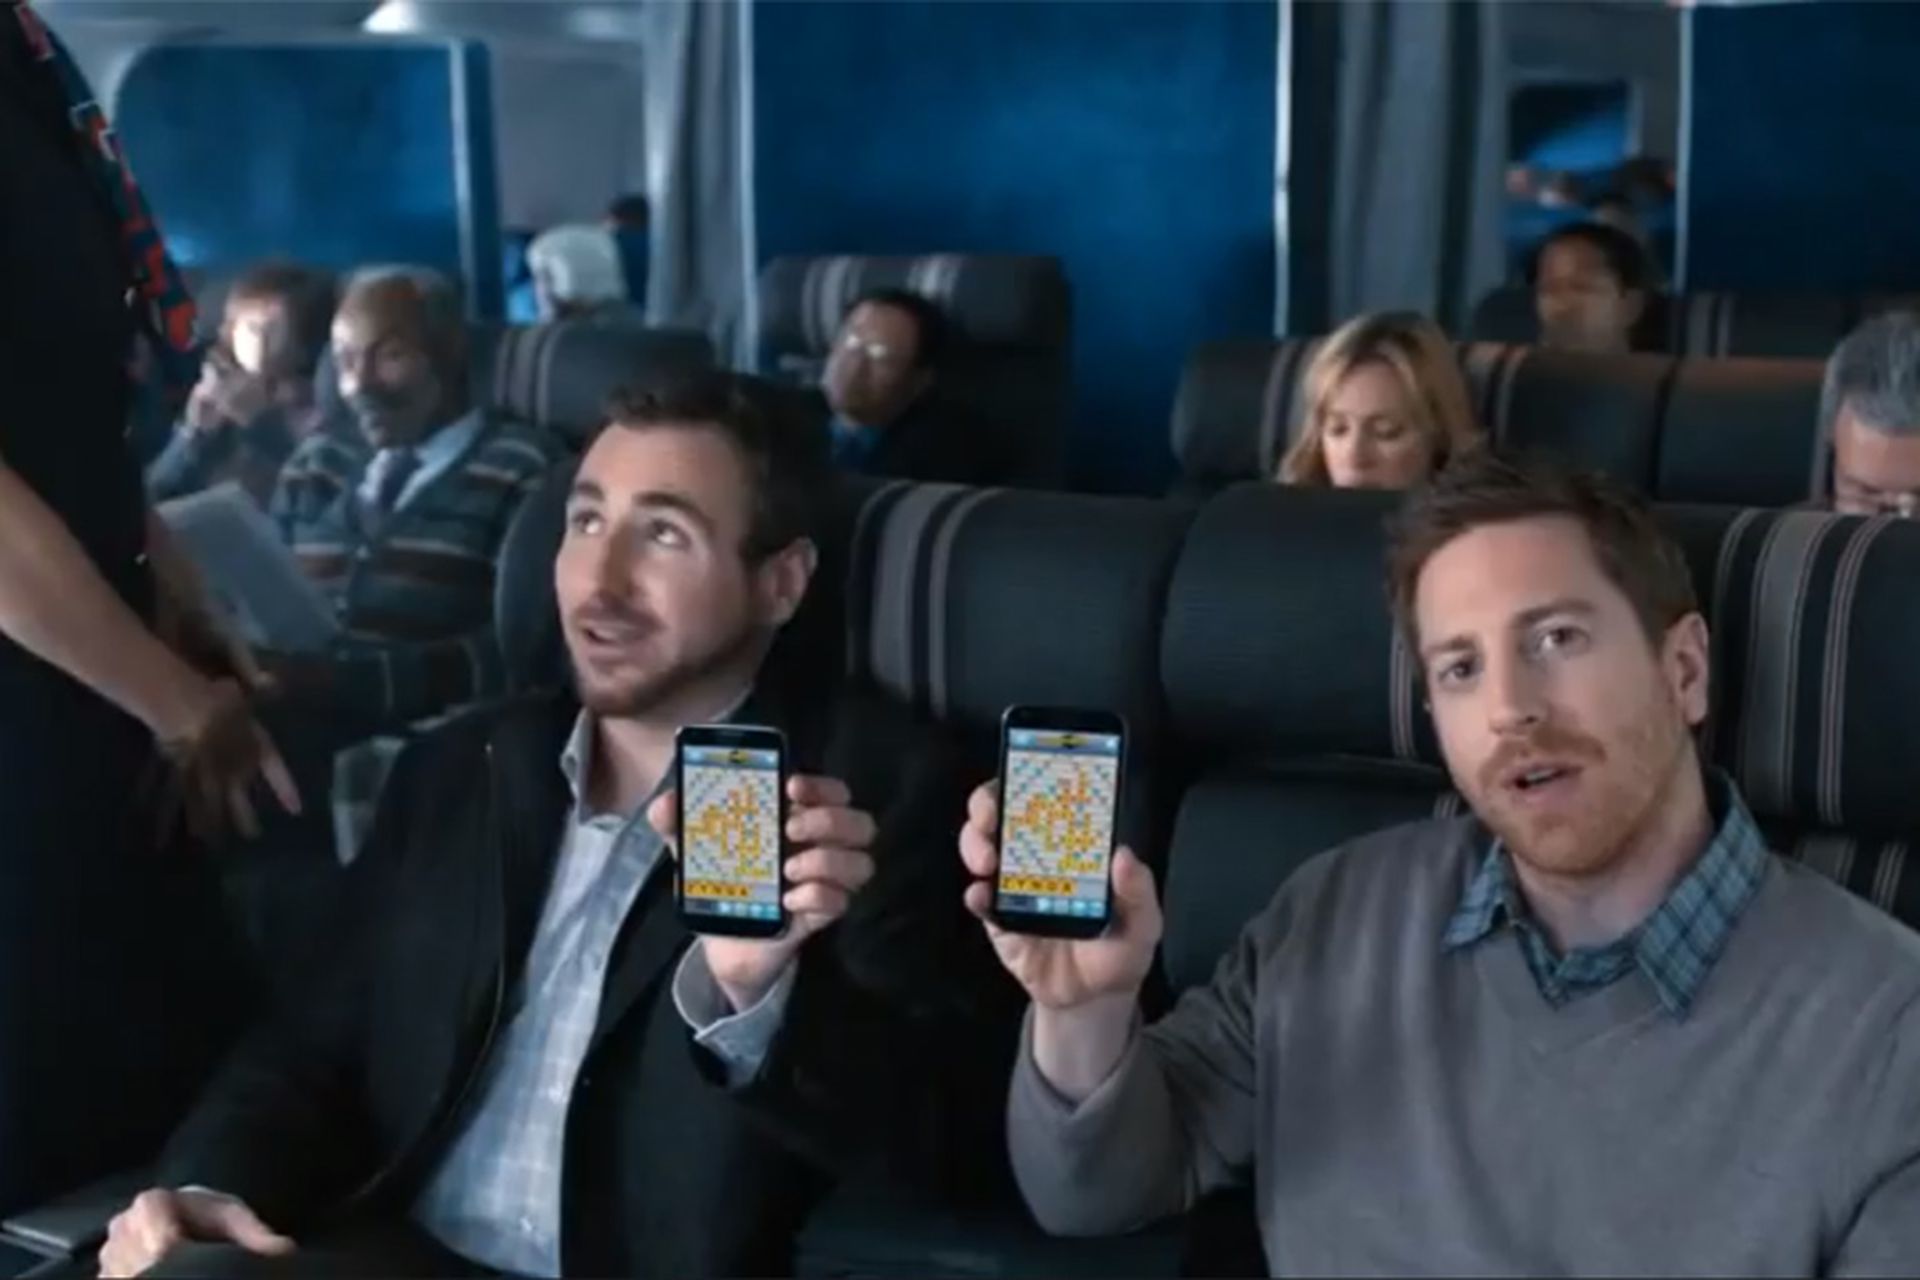 Best Buy Super Bowl spot features some of mobile's biggest innovators